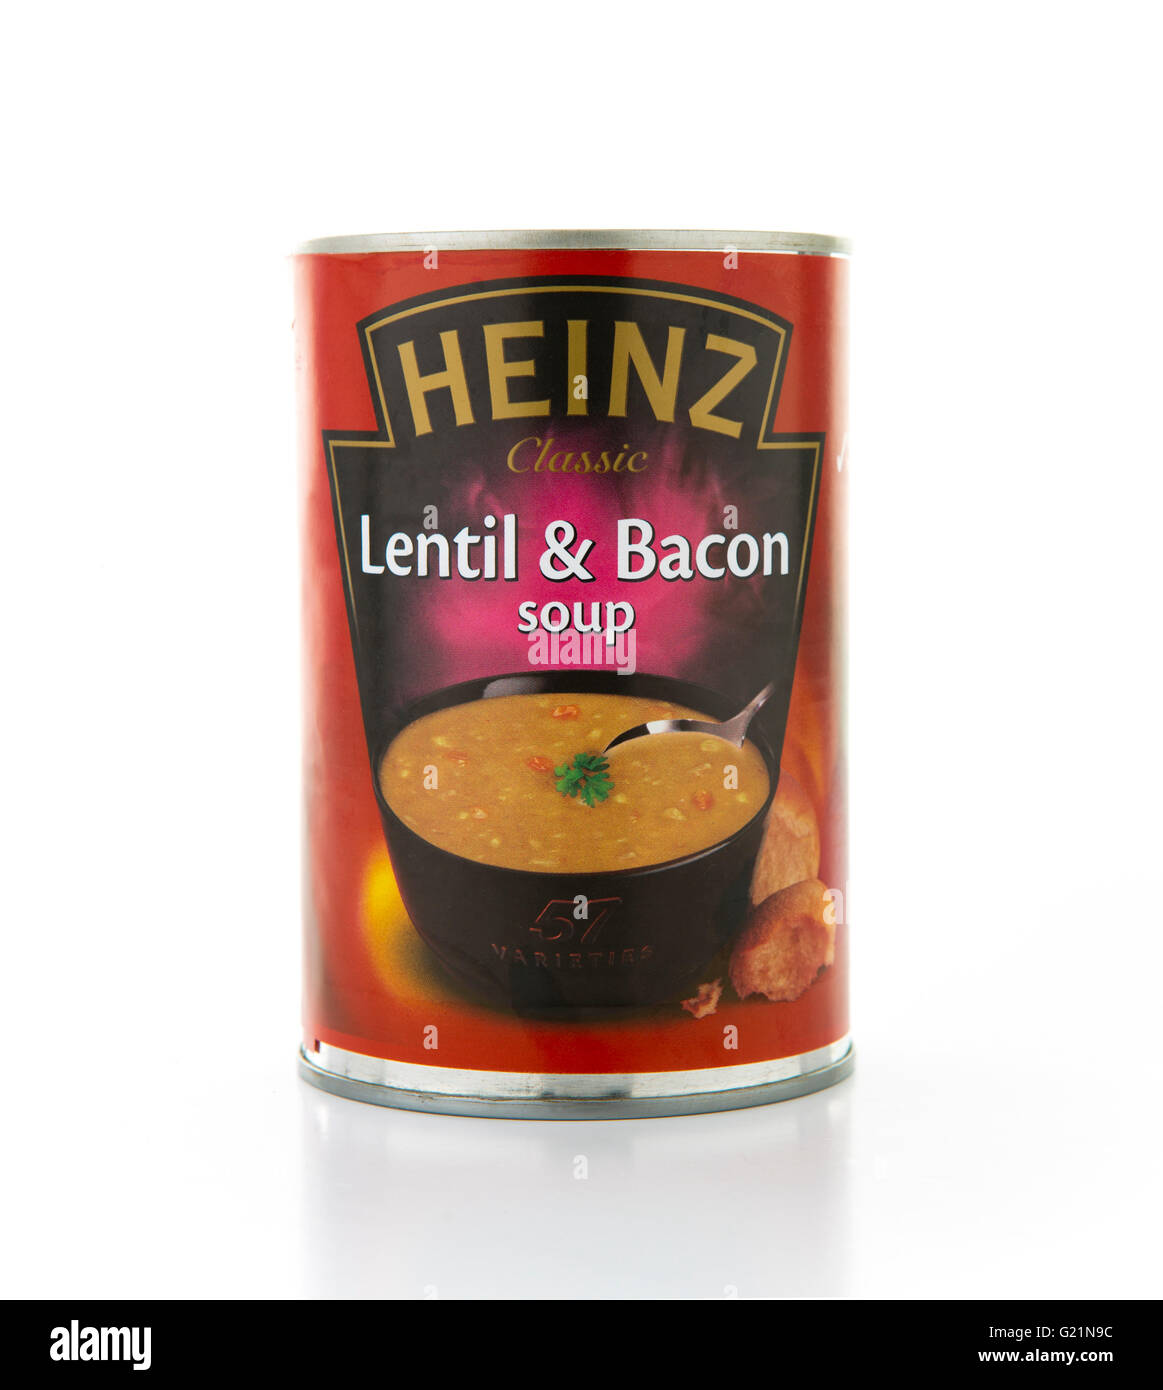 Heinz lentil and Bacon soup on a white background Stock Photo